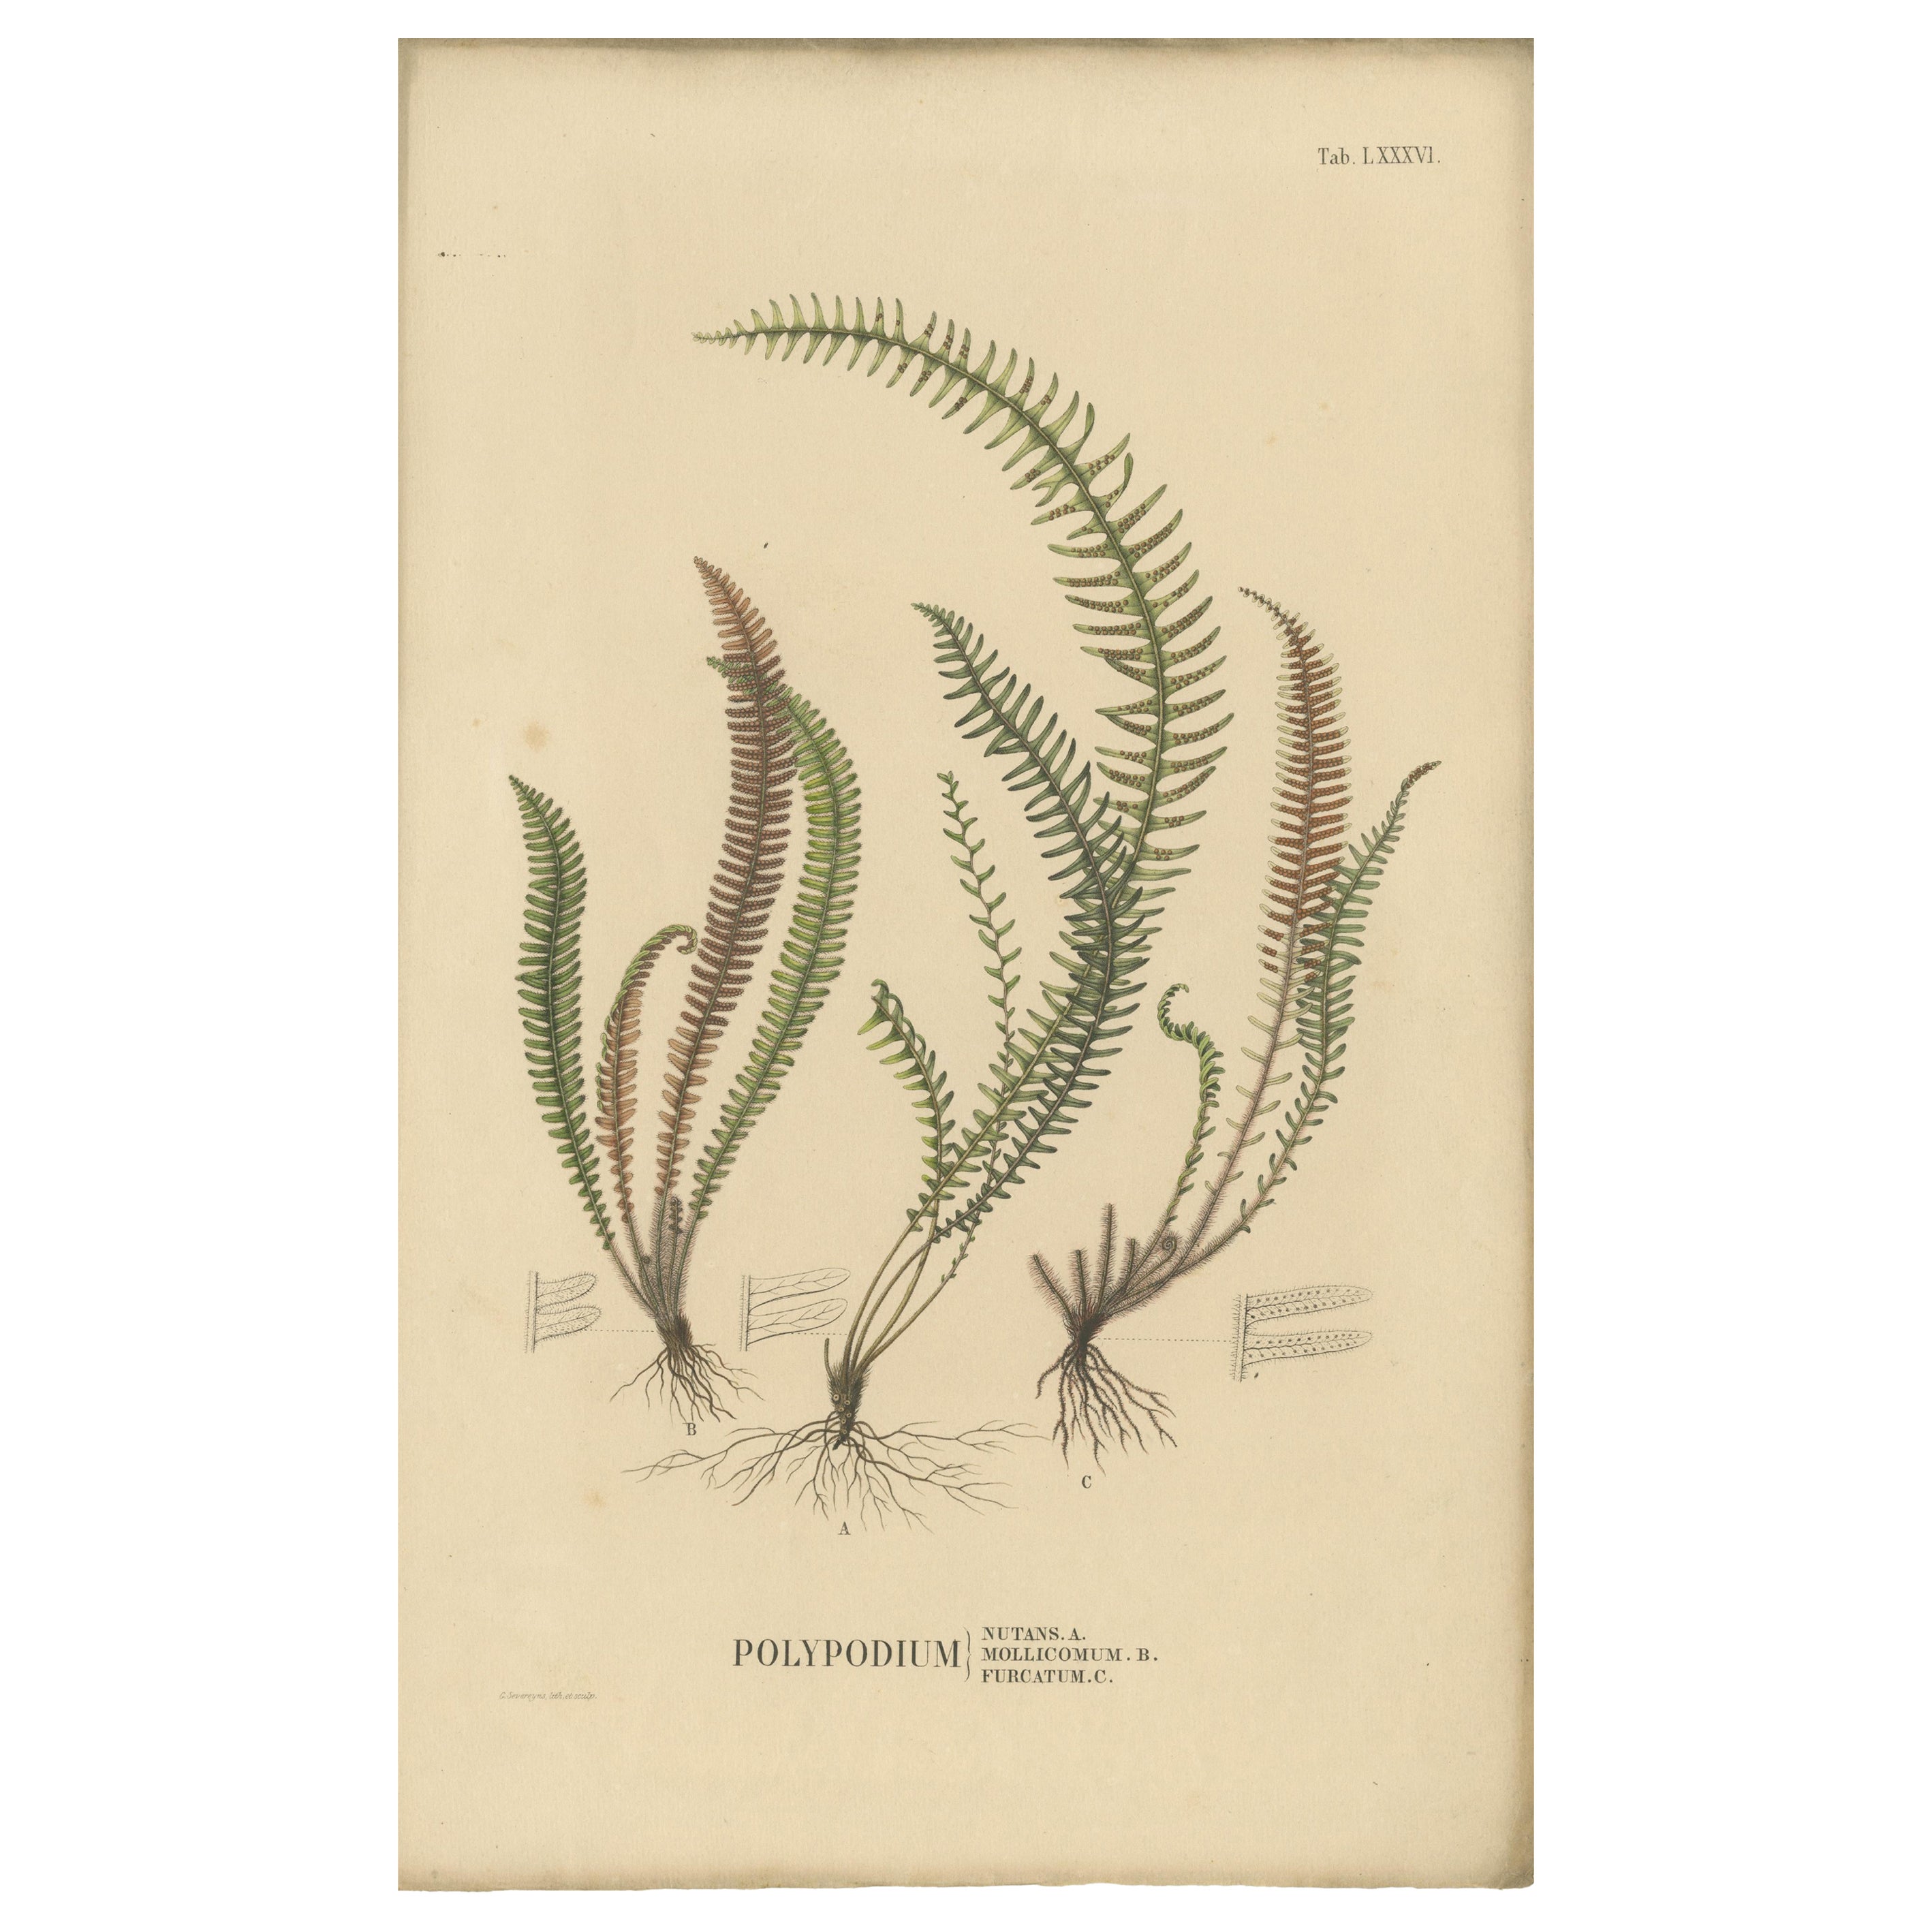 Majestically Handcolored Lithograph of Ferns of Indonesia 'Polypodium', 1829